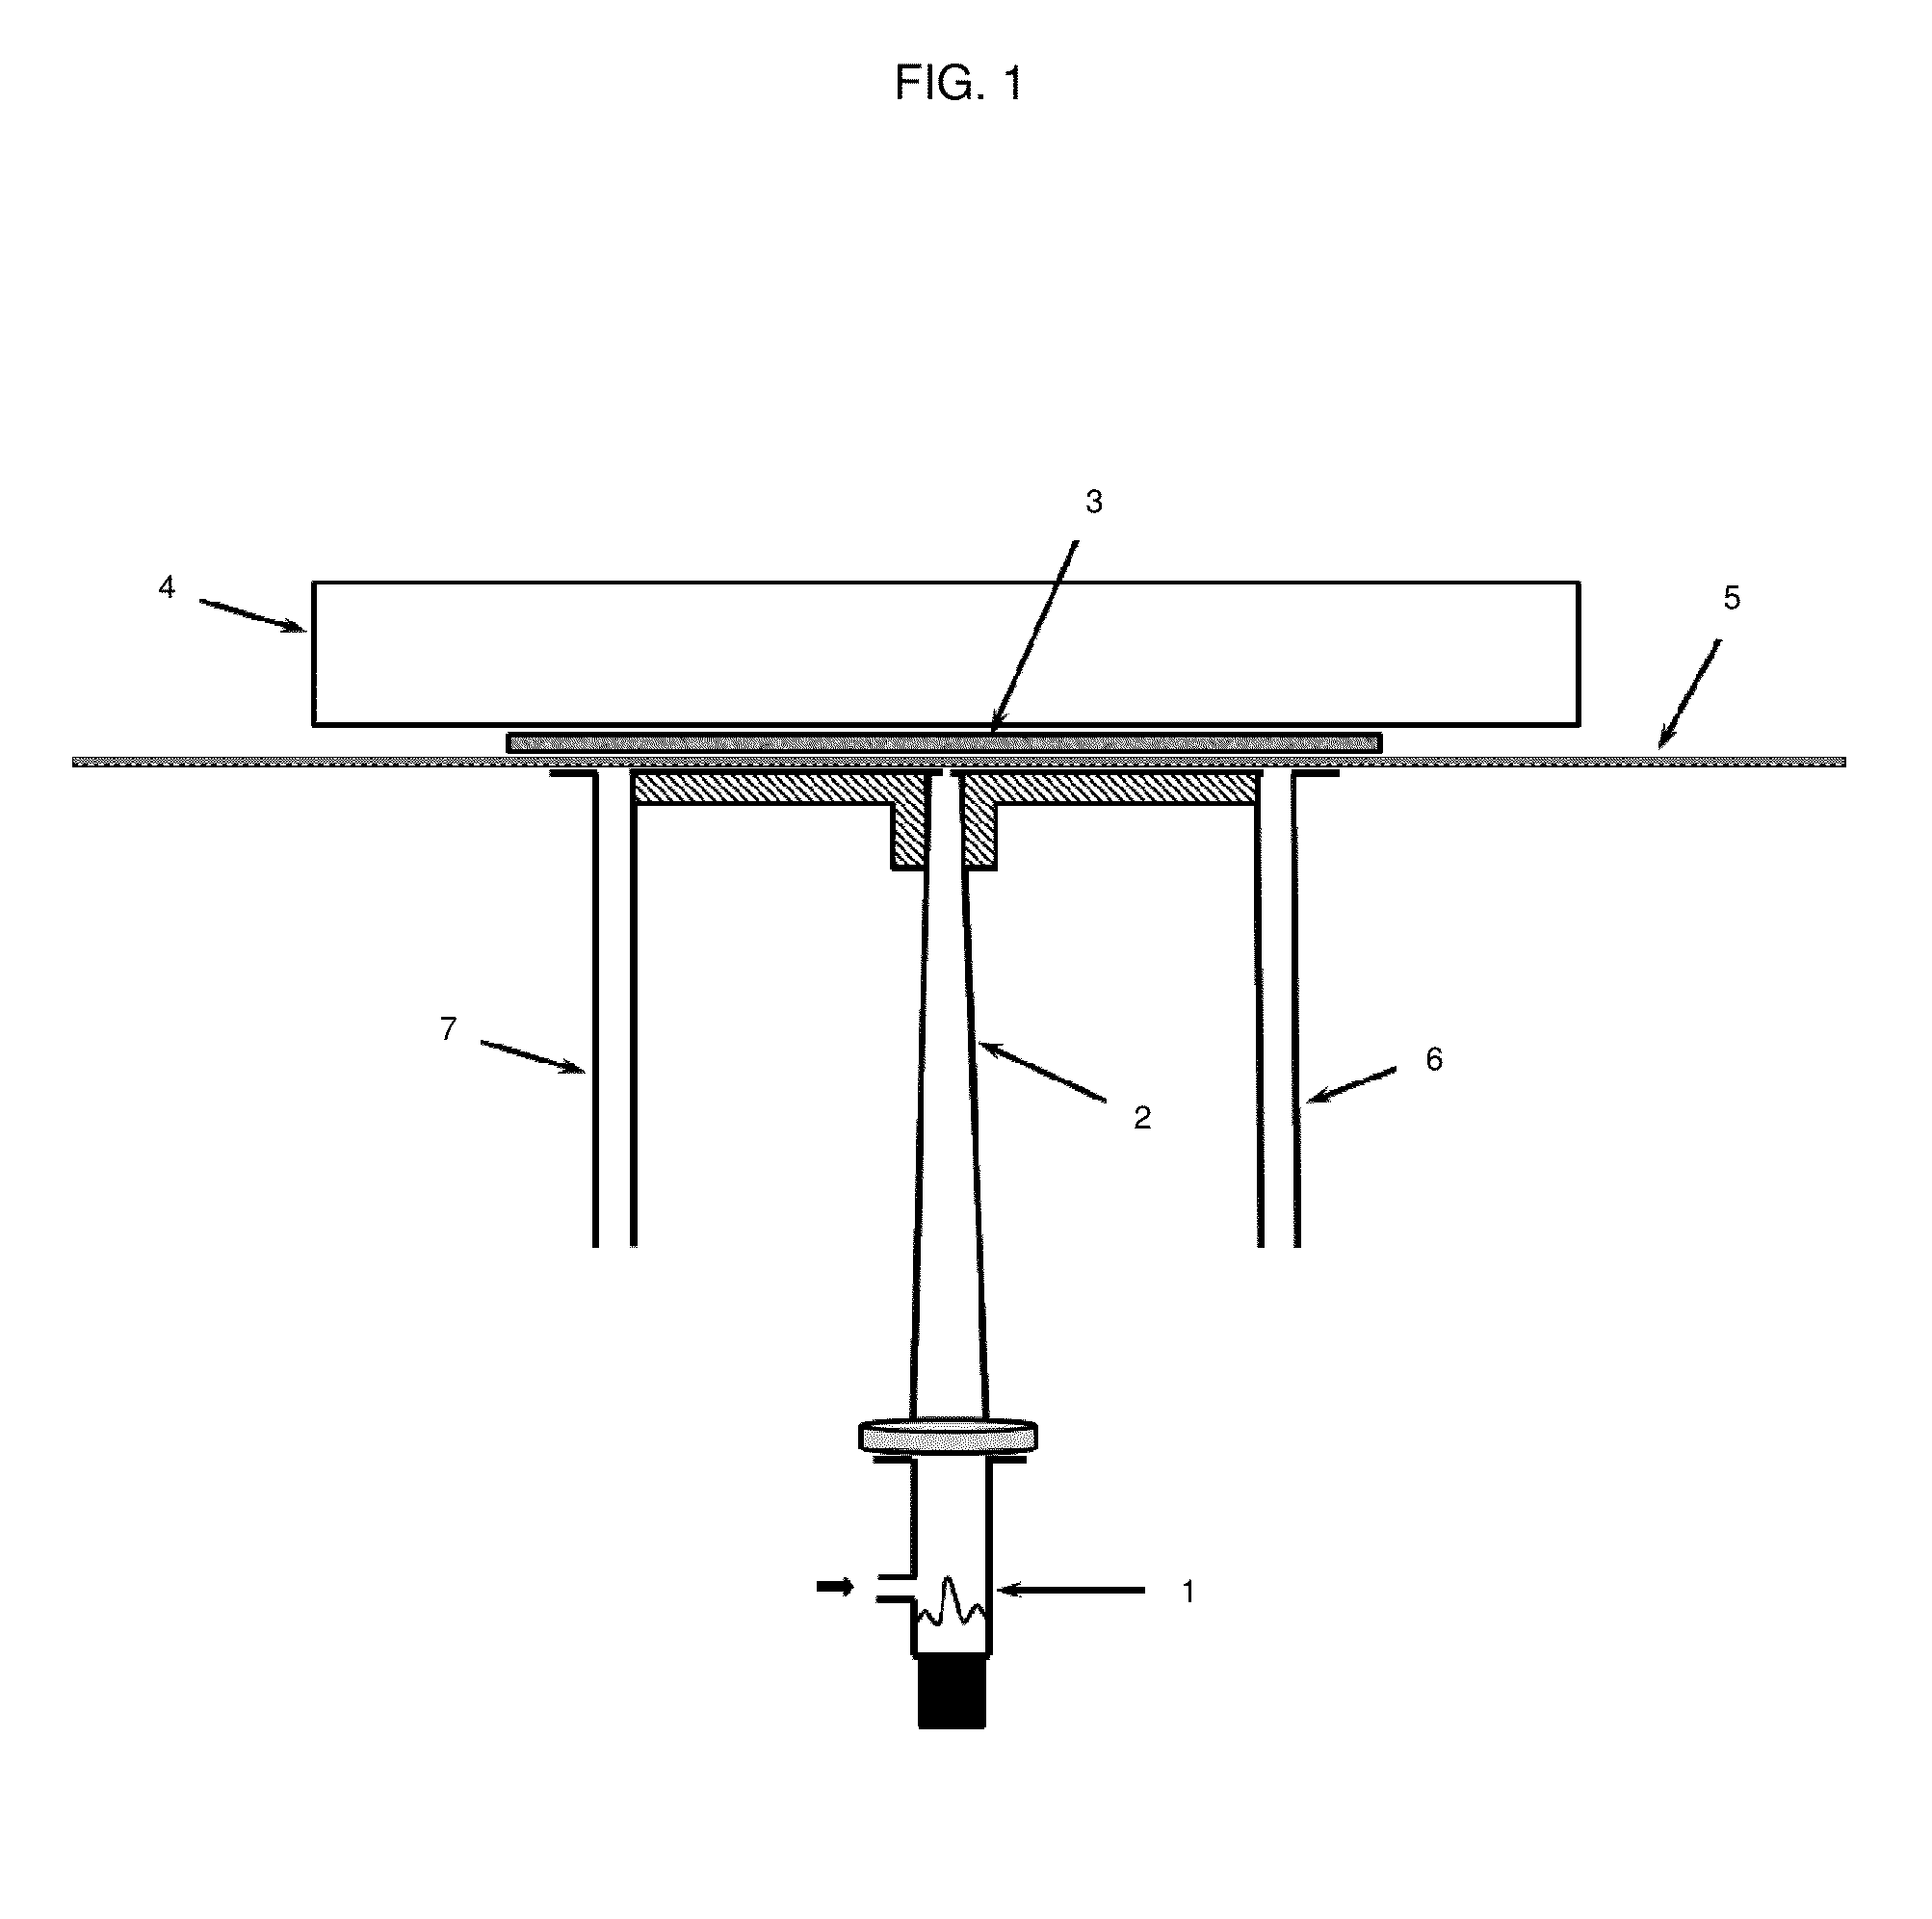 Injection nozzle for aerosols and their method of use to deposit different coatings via vapor chemical deposition  assisted by aerosol